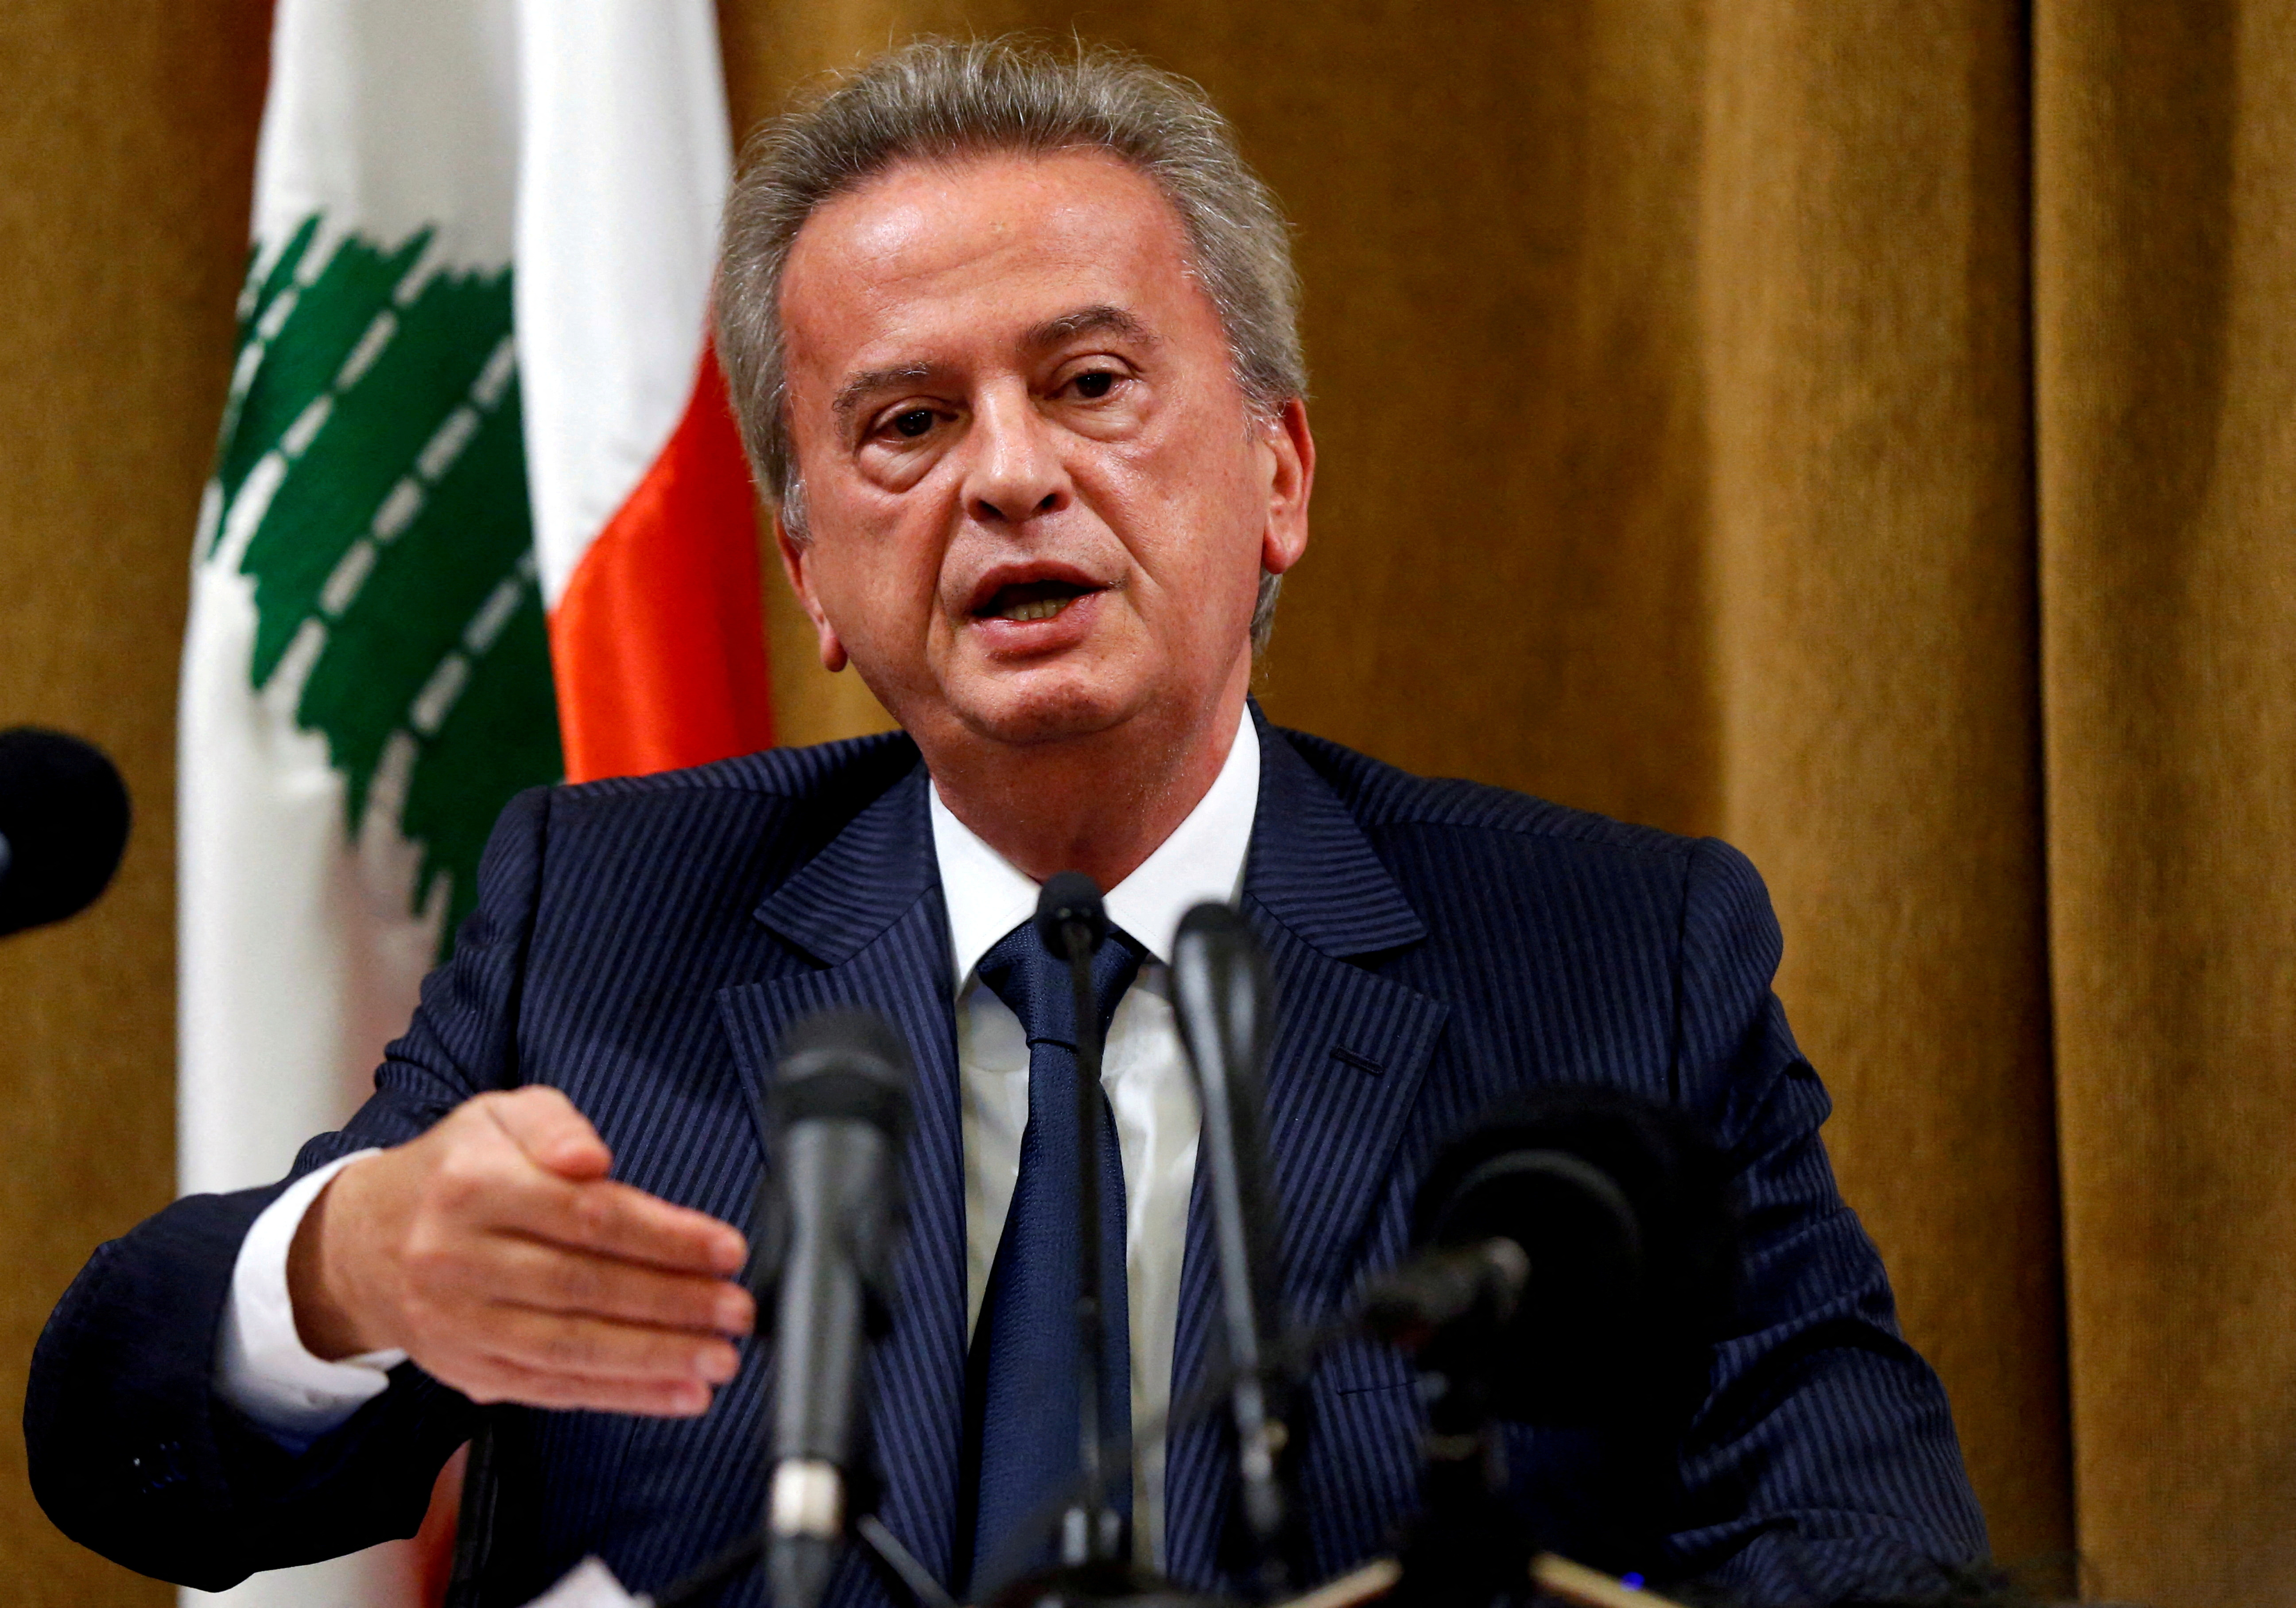 Lebanon's Central Bank Governor Riad Salameh speaks during a news conference at Central Bank in Beirut